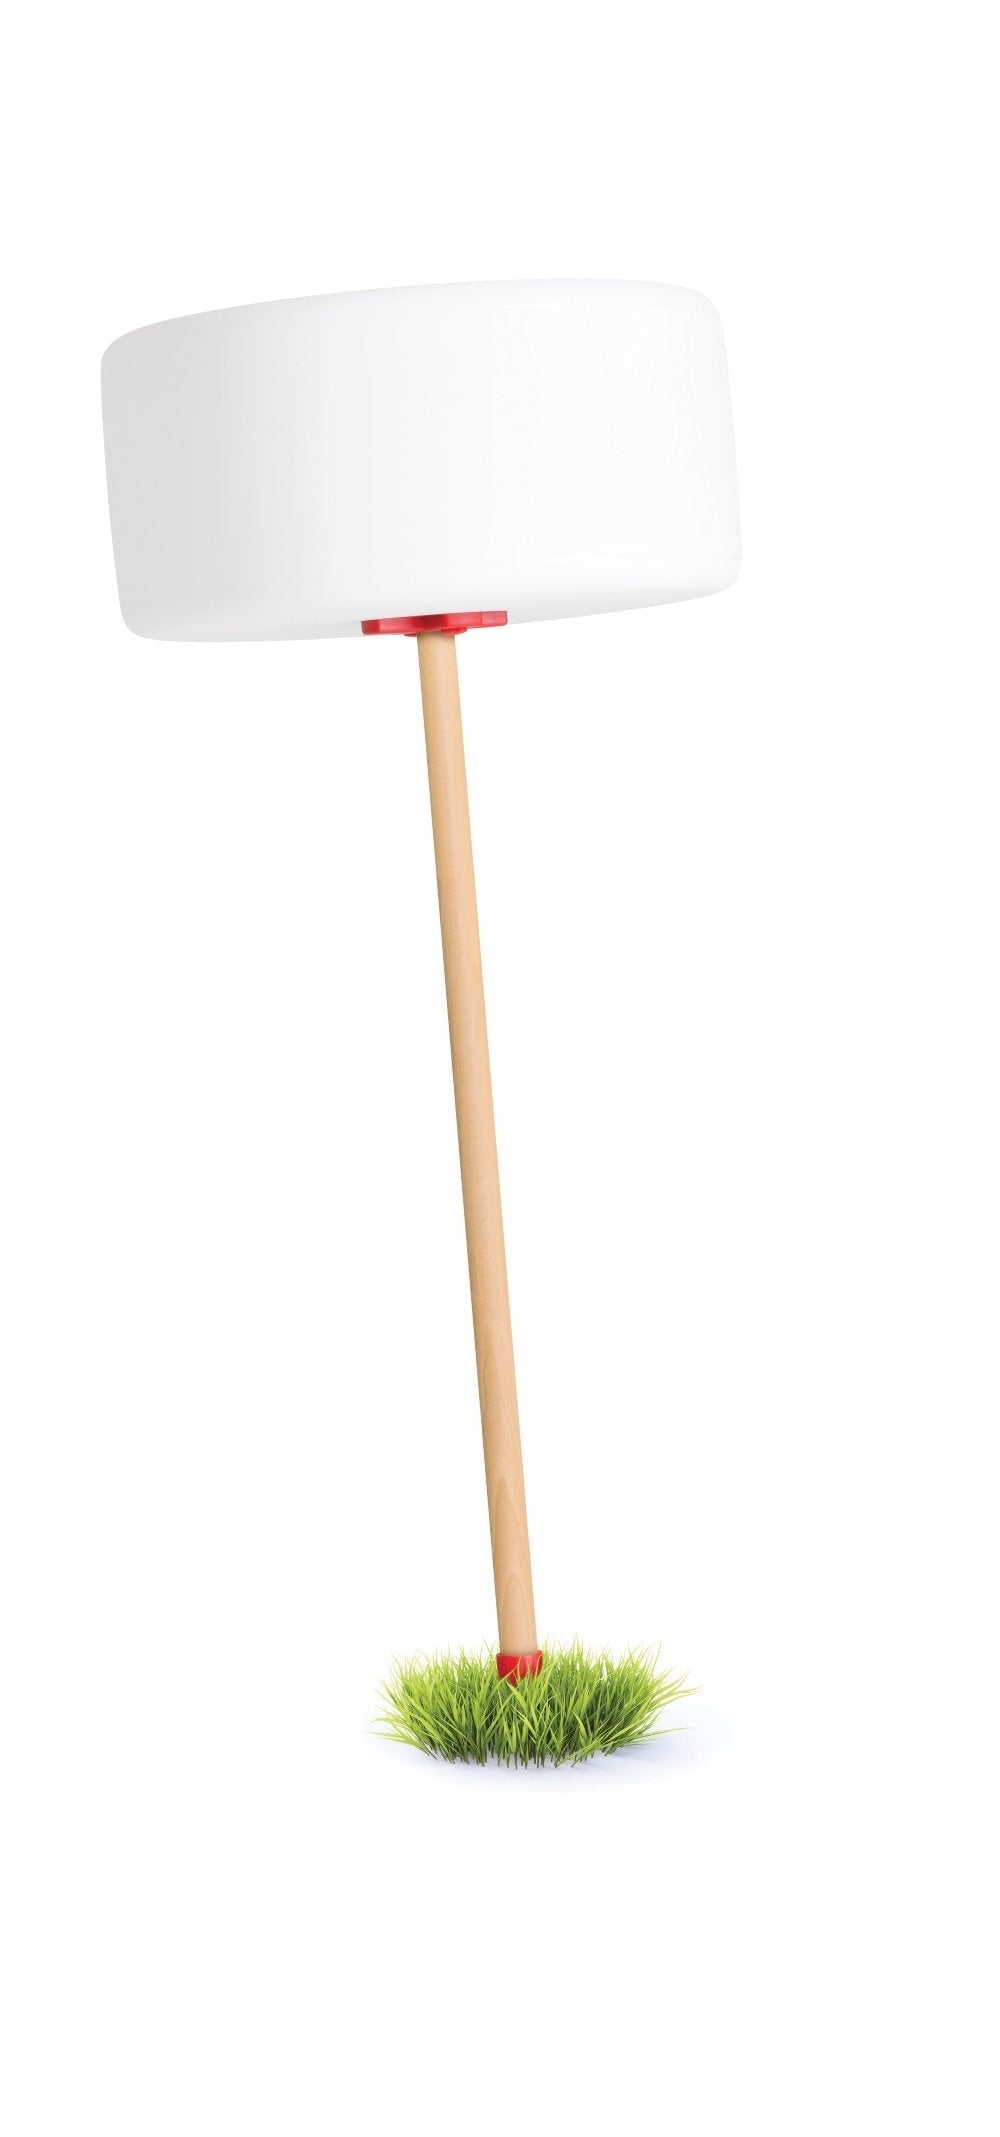 Fatboy Thierry Le Swinger Suspension Lamp, Red